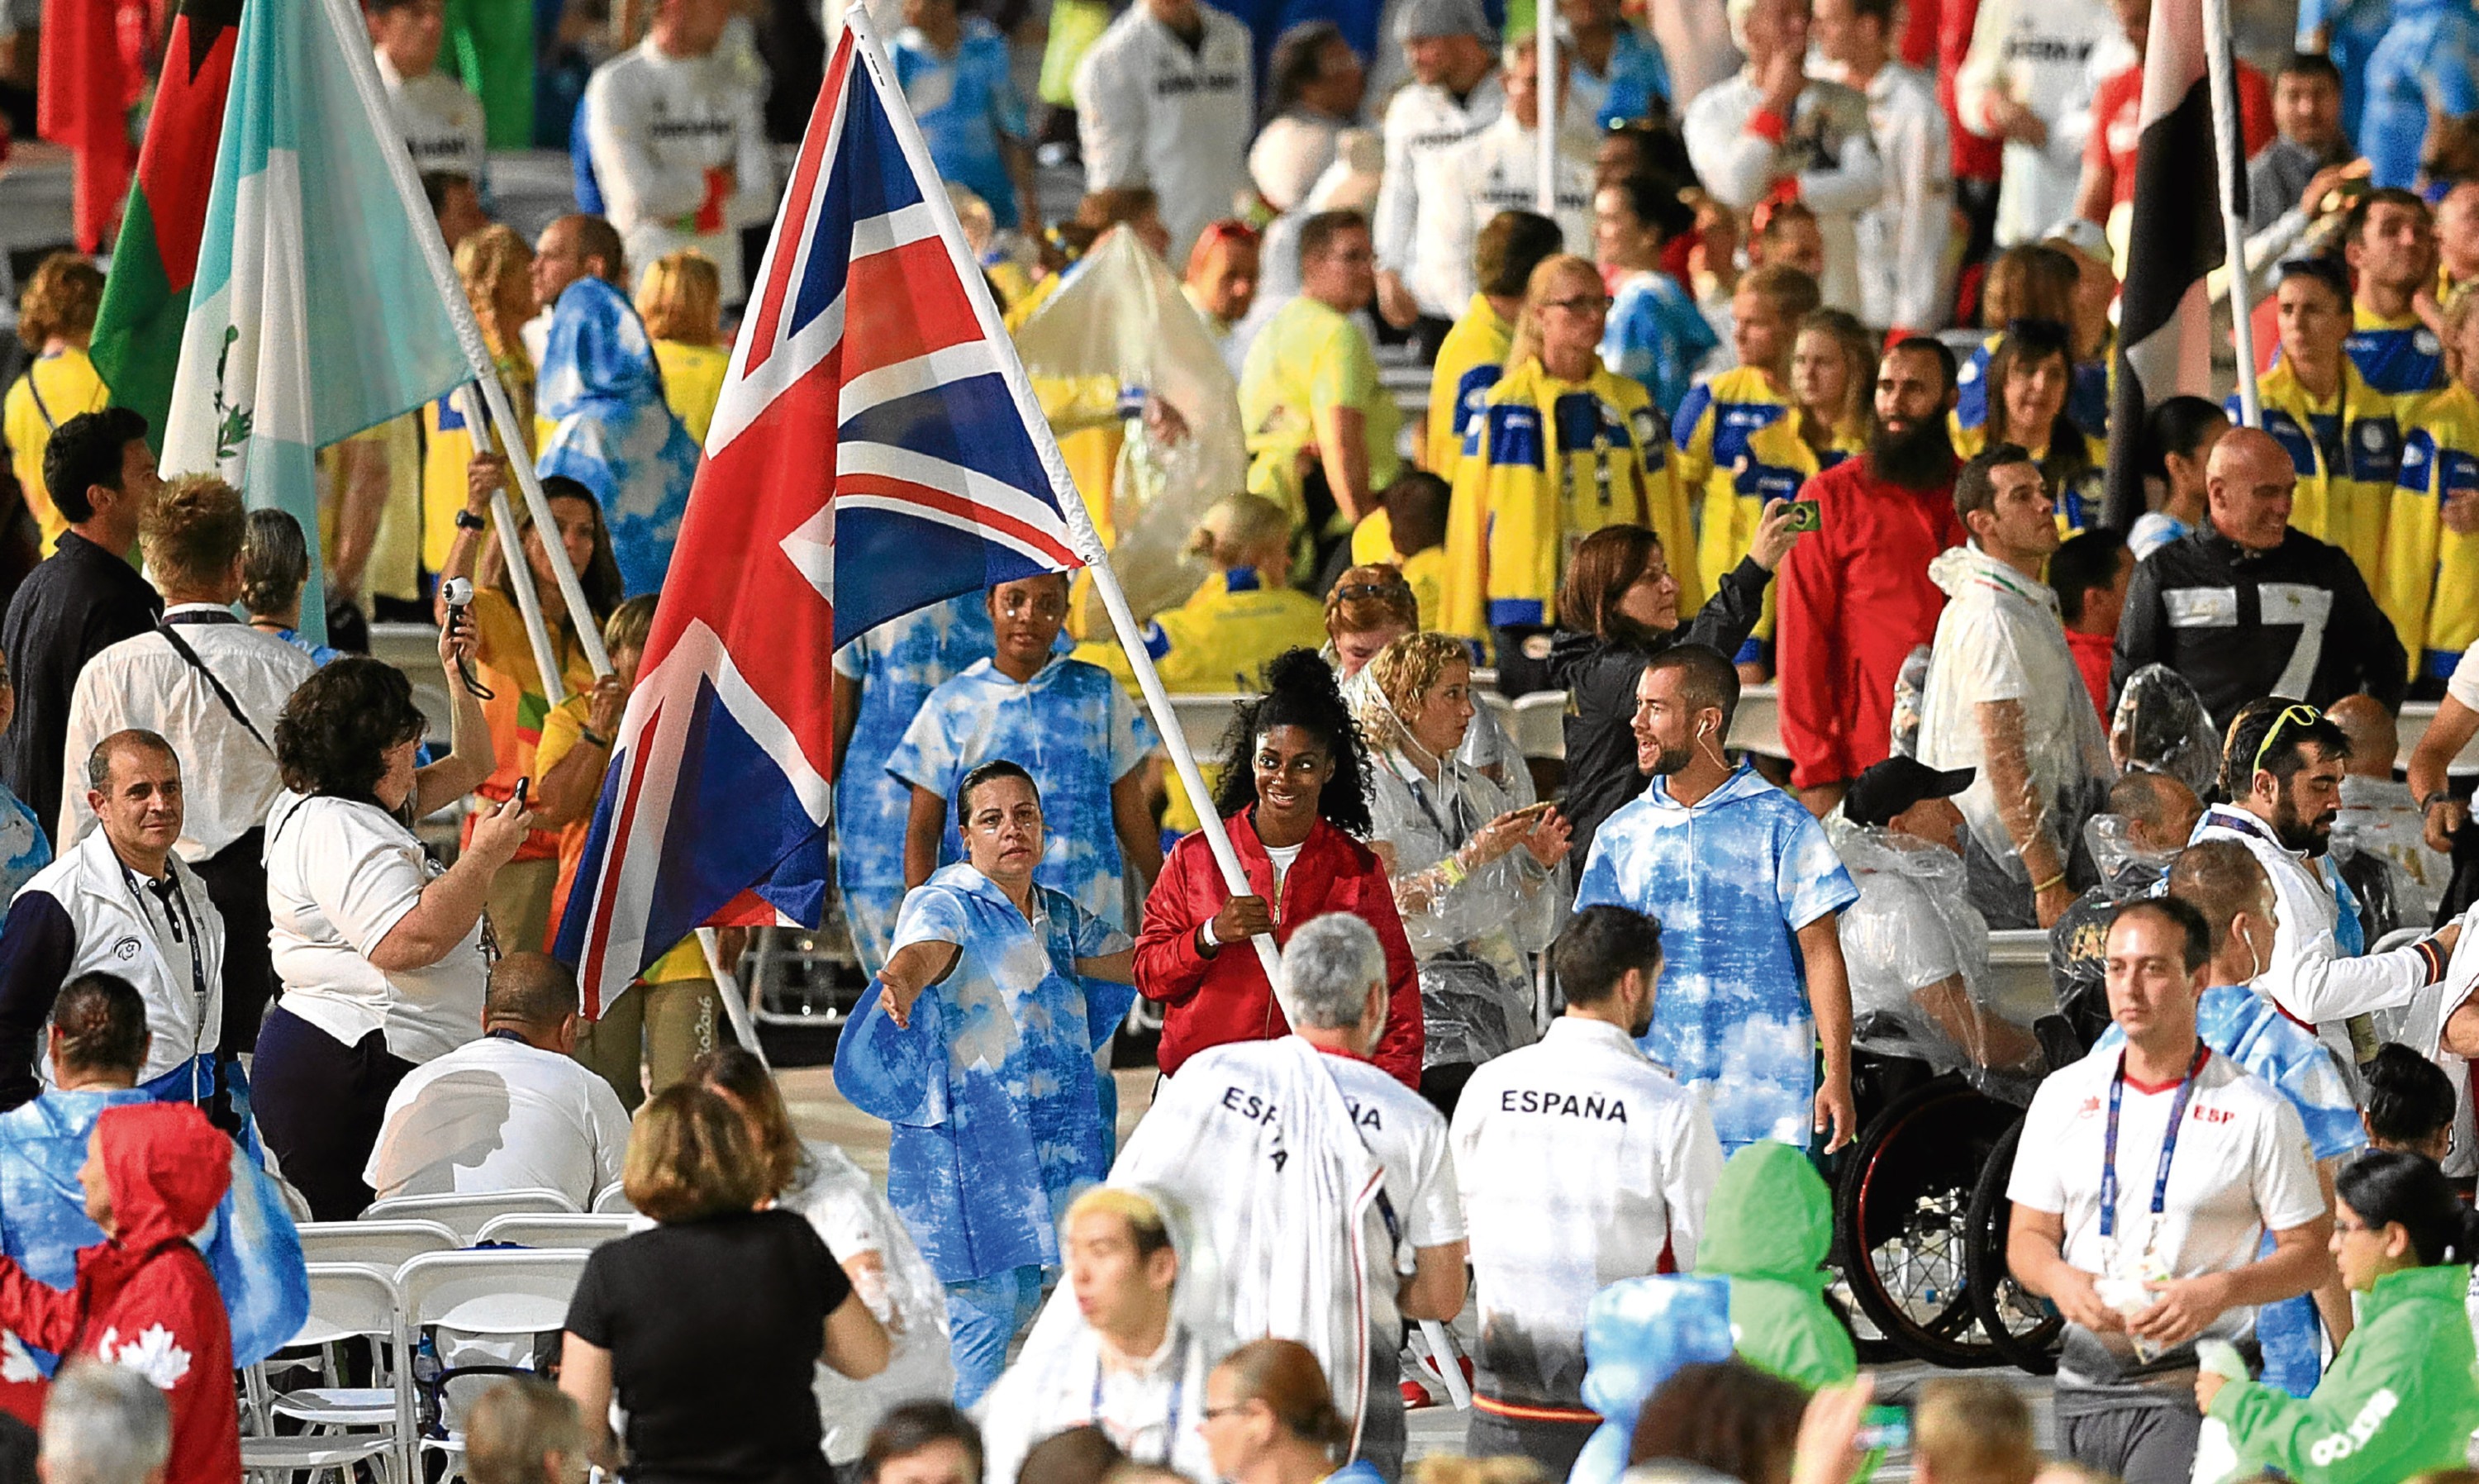 Great Britain's Kadeena Cox carrying the Union Jack flag during Paralympics closing ceremony.